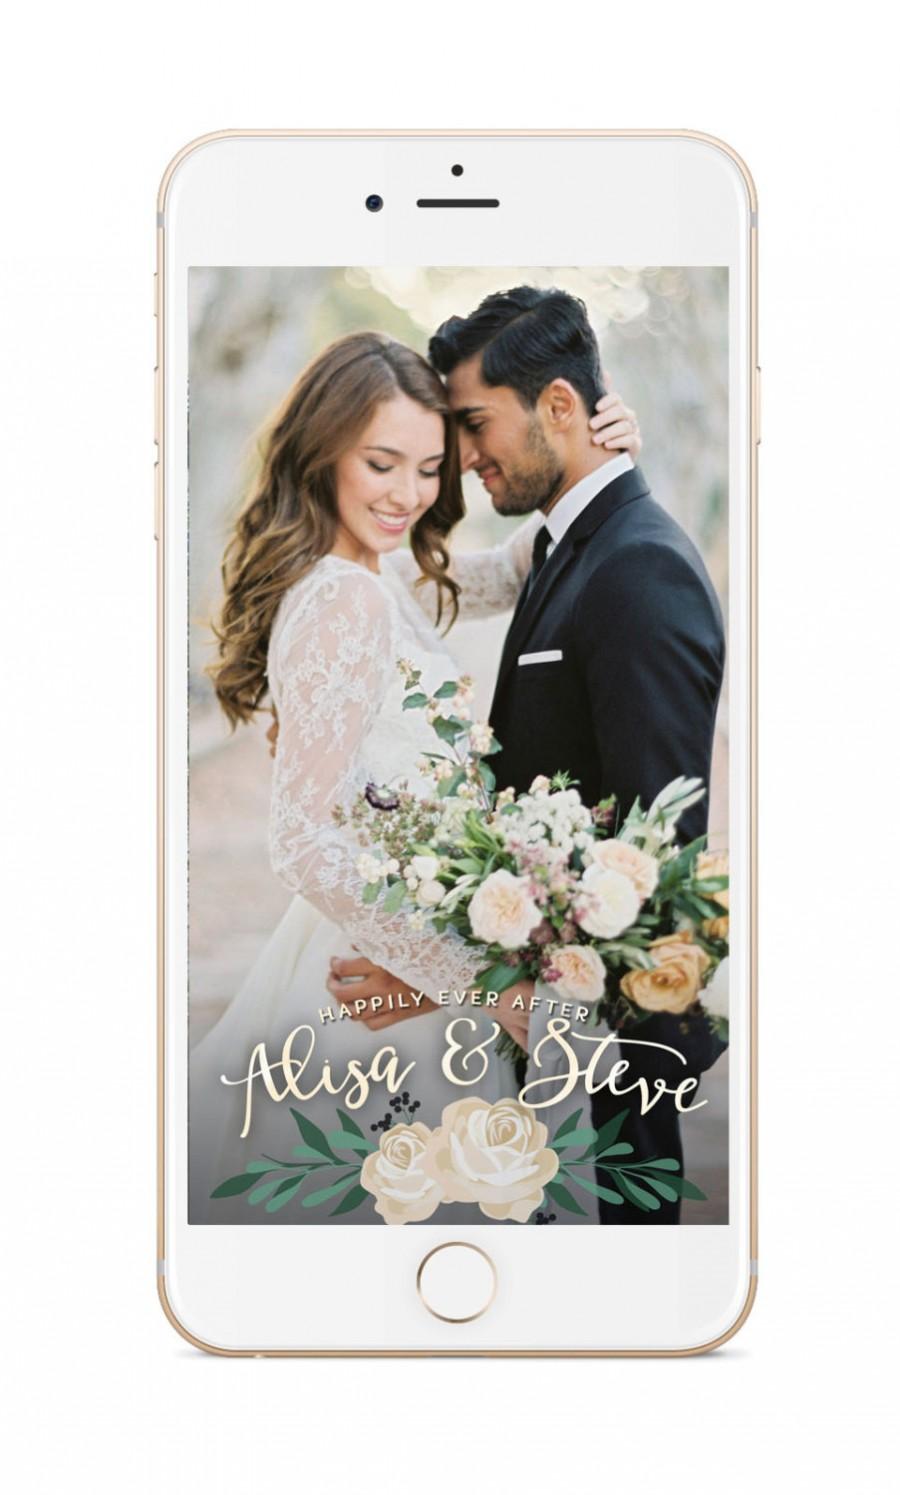 Wedding - Wedding Snapchat Geofilter Wedding Geofilter Personalized filter Customized Names On Demand GeoFilter Wedding Decorations Geofilter Party